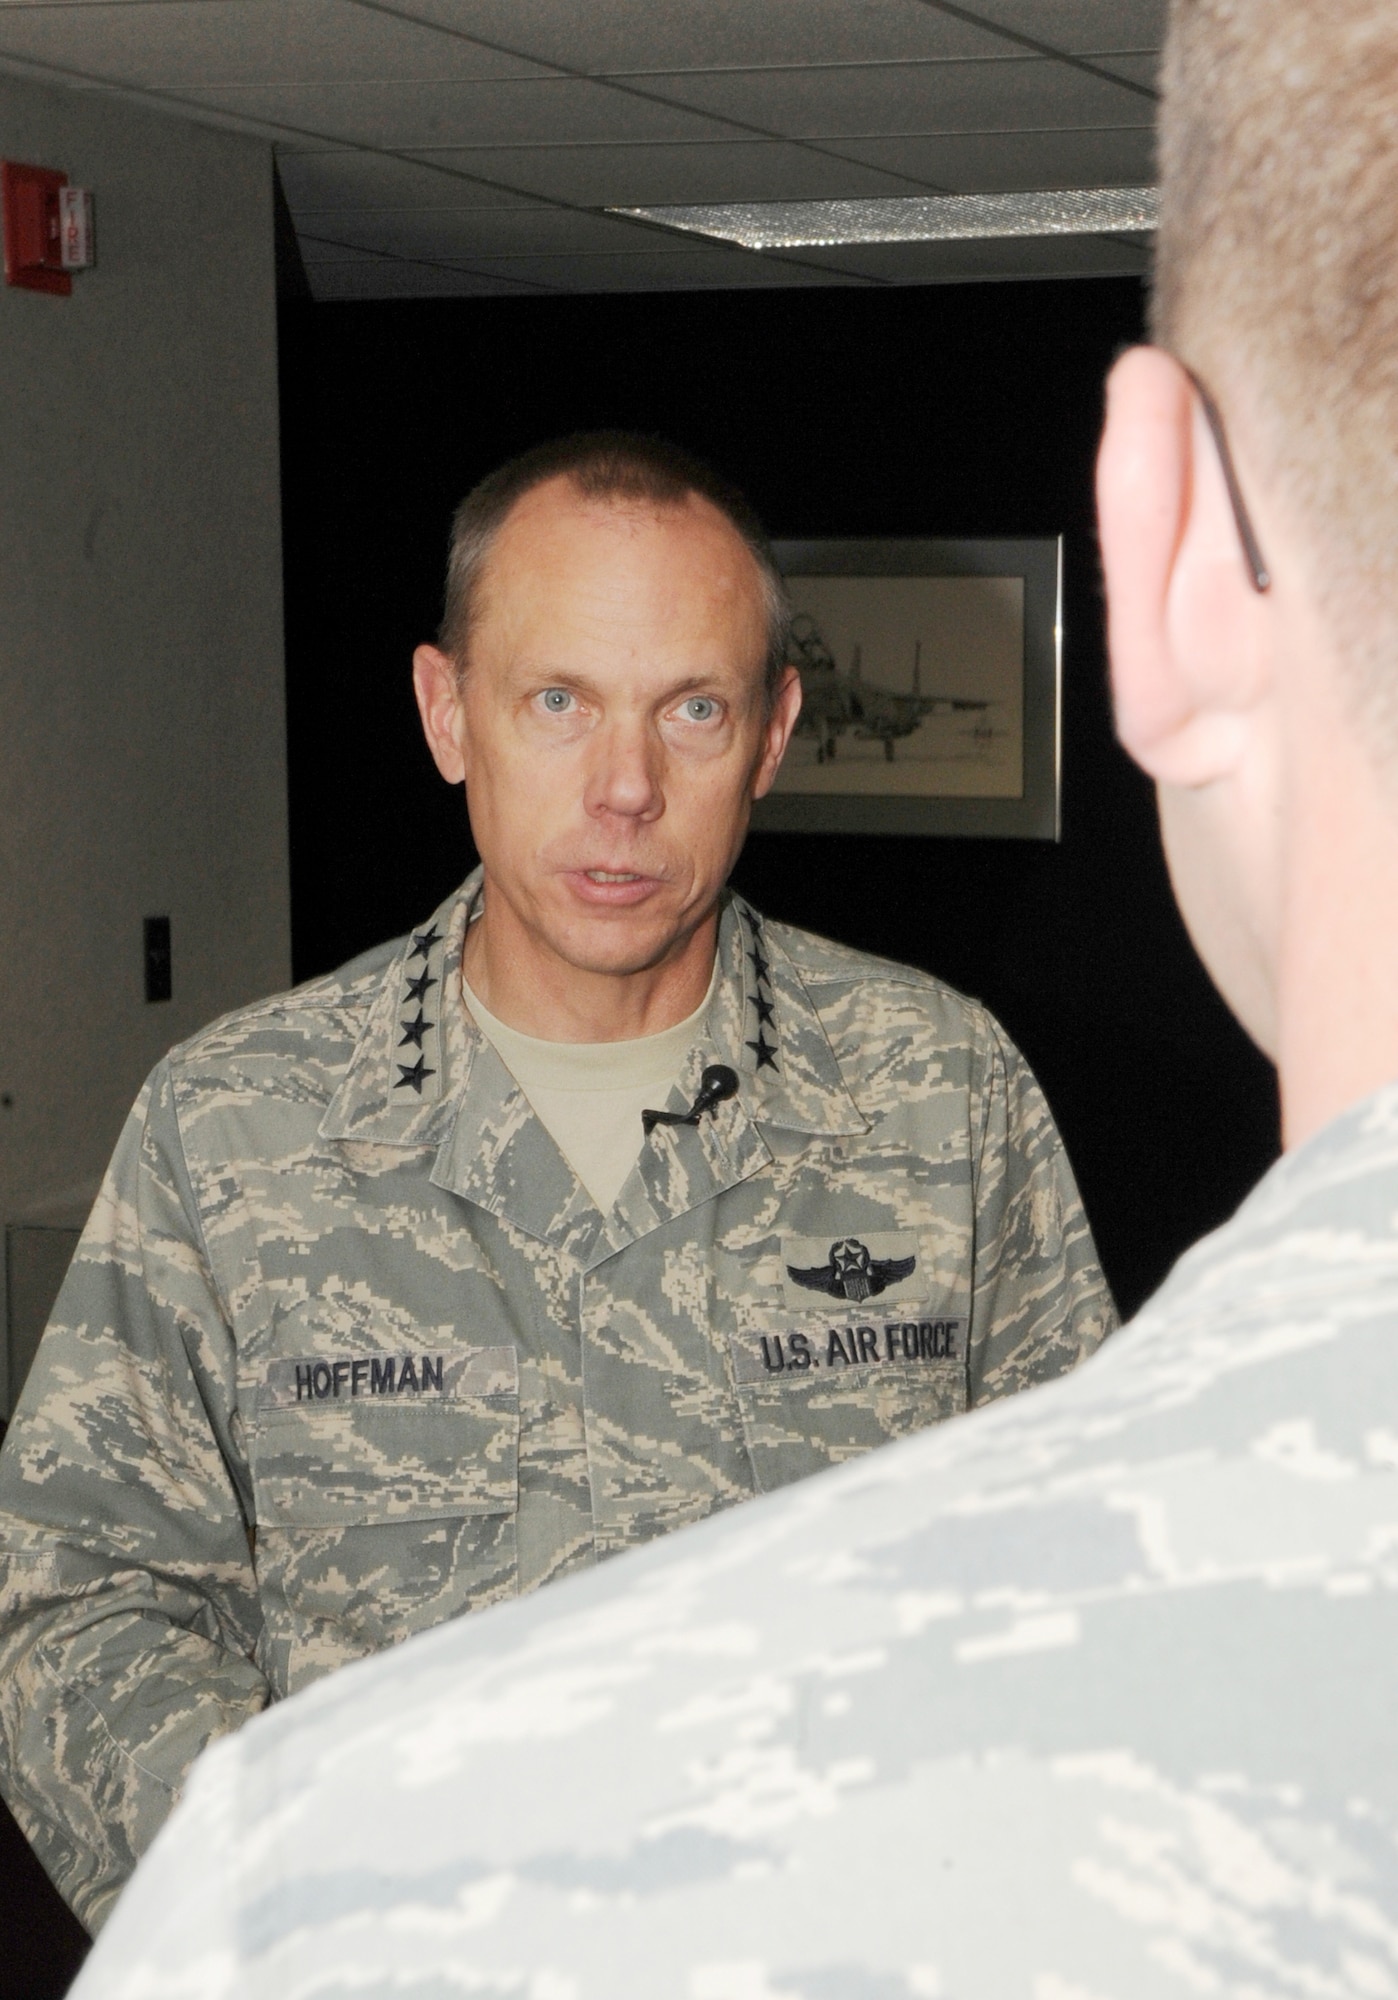 WHITEMAN AIR FORCE BASE, Mo., -- Gen. Donald J. Hoffman, Air Force Materiel Command commander, addresses questions during an interview prior to departing Whiteman AFB, Mo., April 29, 2010. The general's visit was his first to the 19th Munitions Squadron since its activation in October 2009. (U.S. Air Force photo/Airman 1st Class Carlin Leslie)